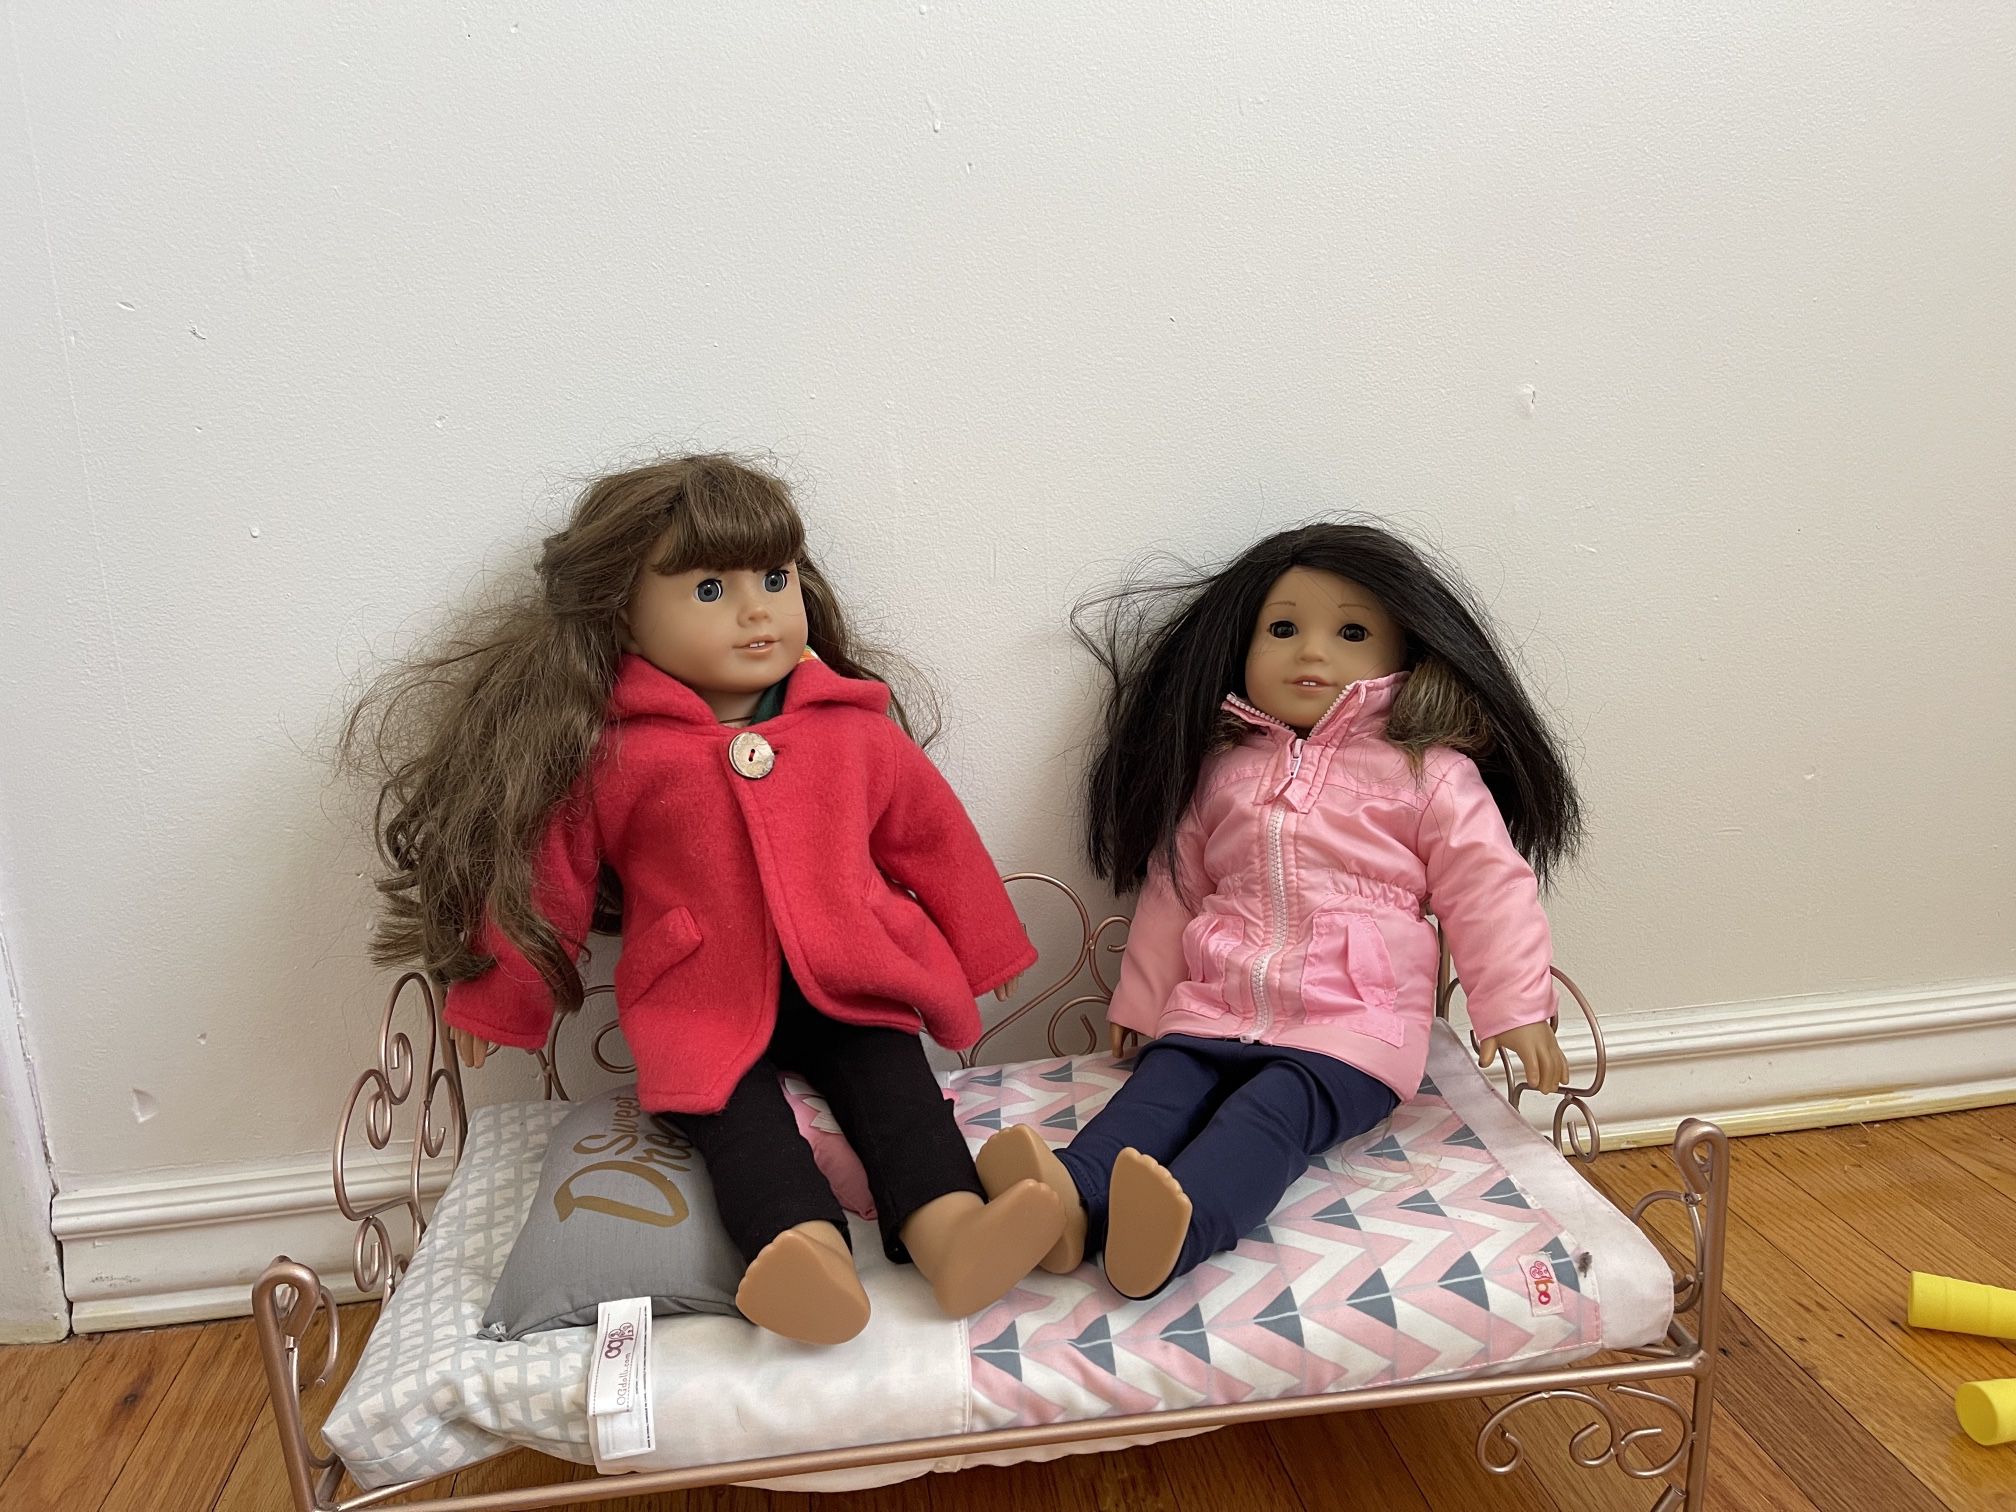 American Girl Dolls And Accessories 